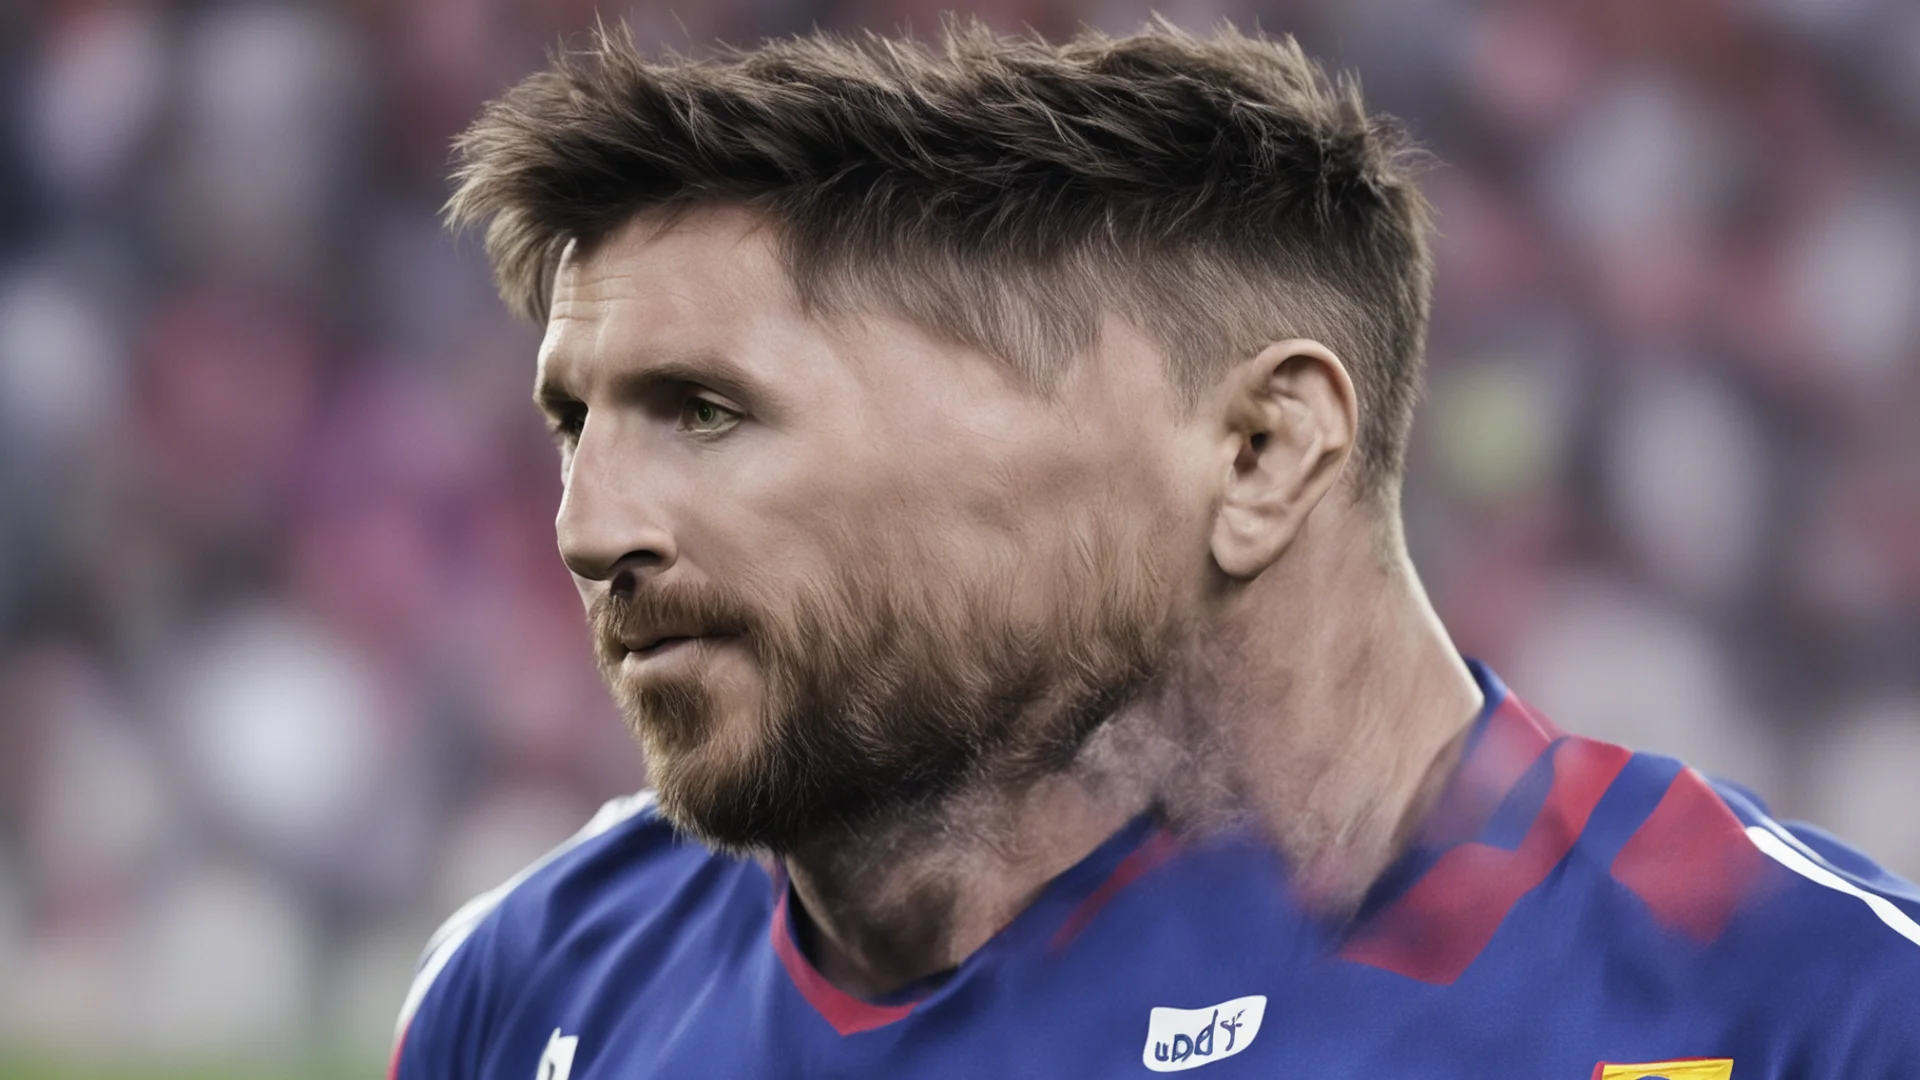 ailionel messi  amazing awesome portrait 2 wide